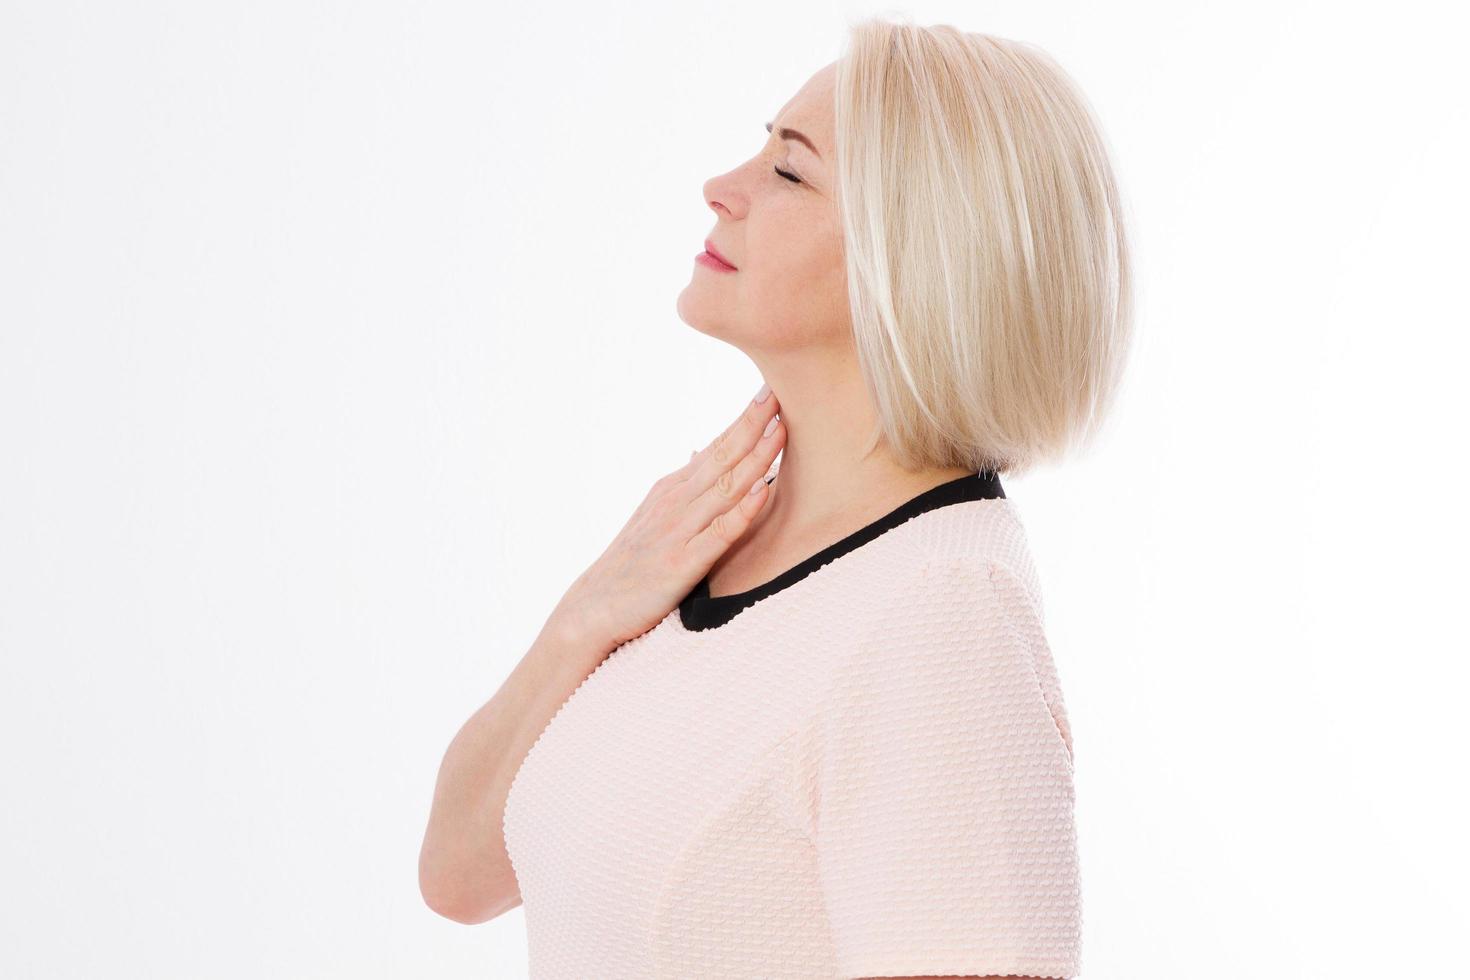 Sore throat woman, middle age woman suffer sore throat pain and touching her heck, female cold photo